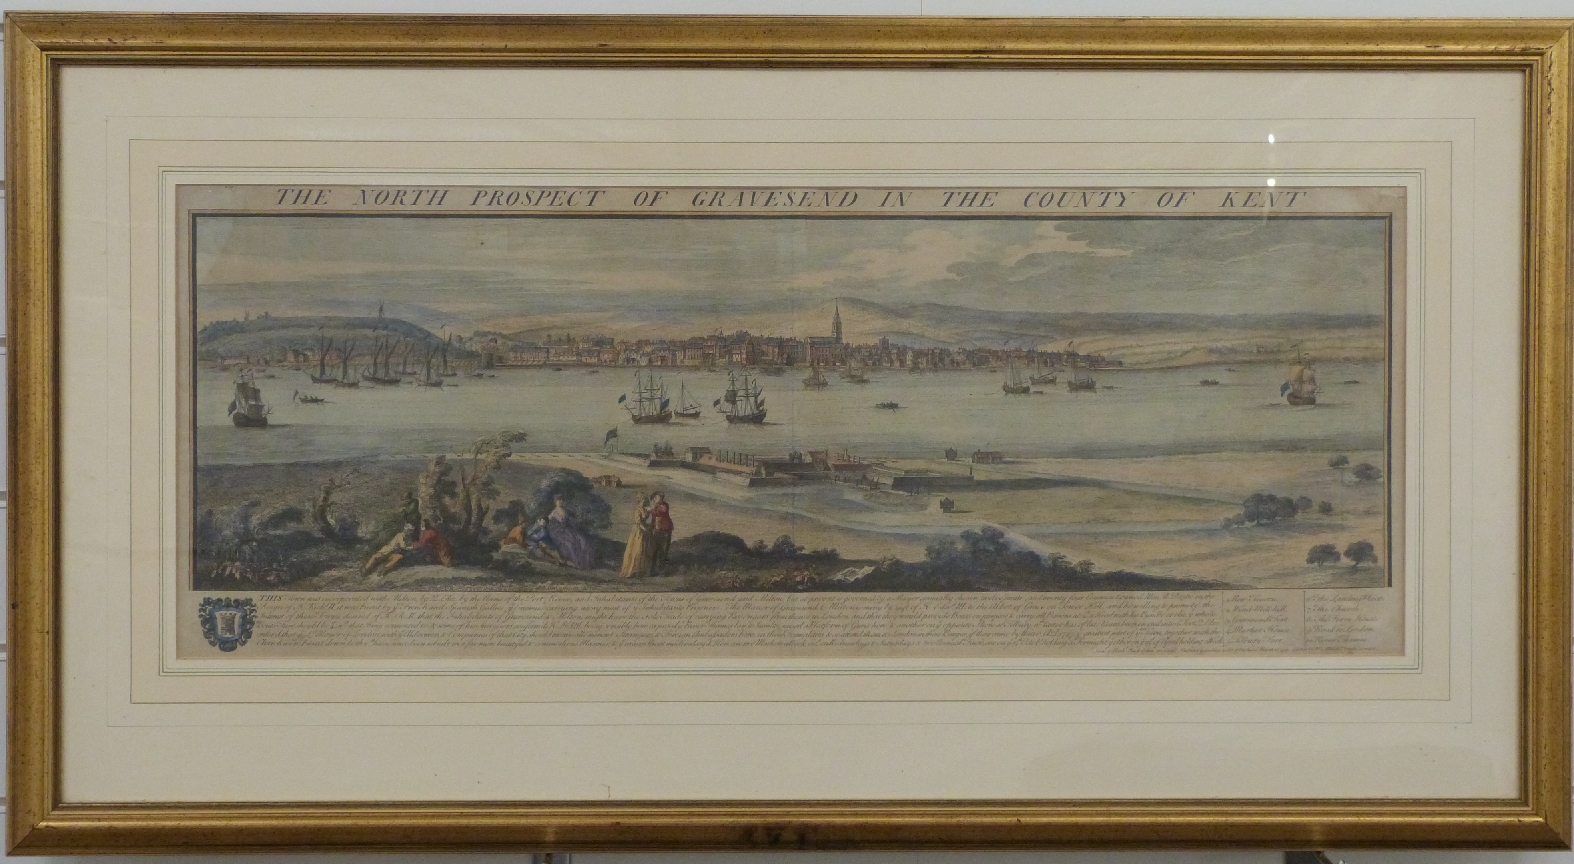 An 18thC coloured engraving The North Prospect of Gravesend in The County of Kent by Samuel and - Image 2 of 3